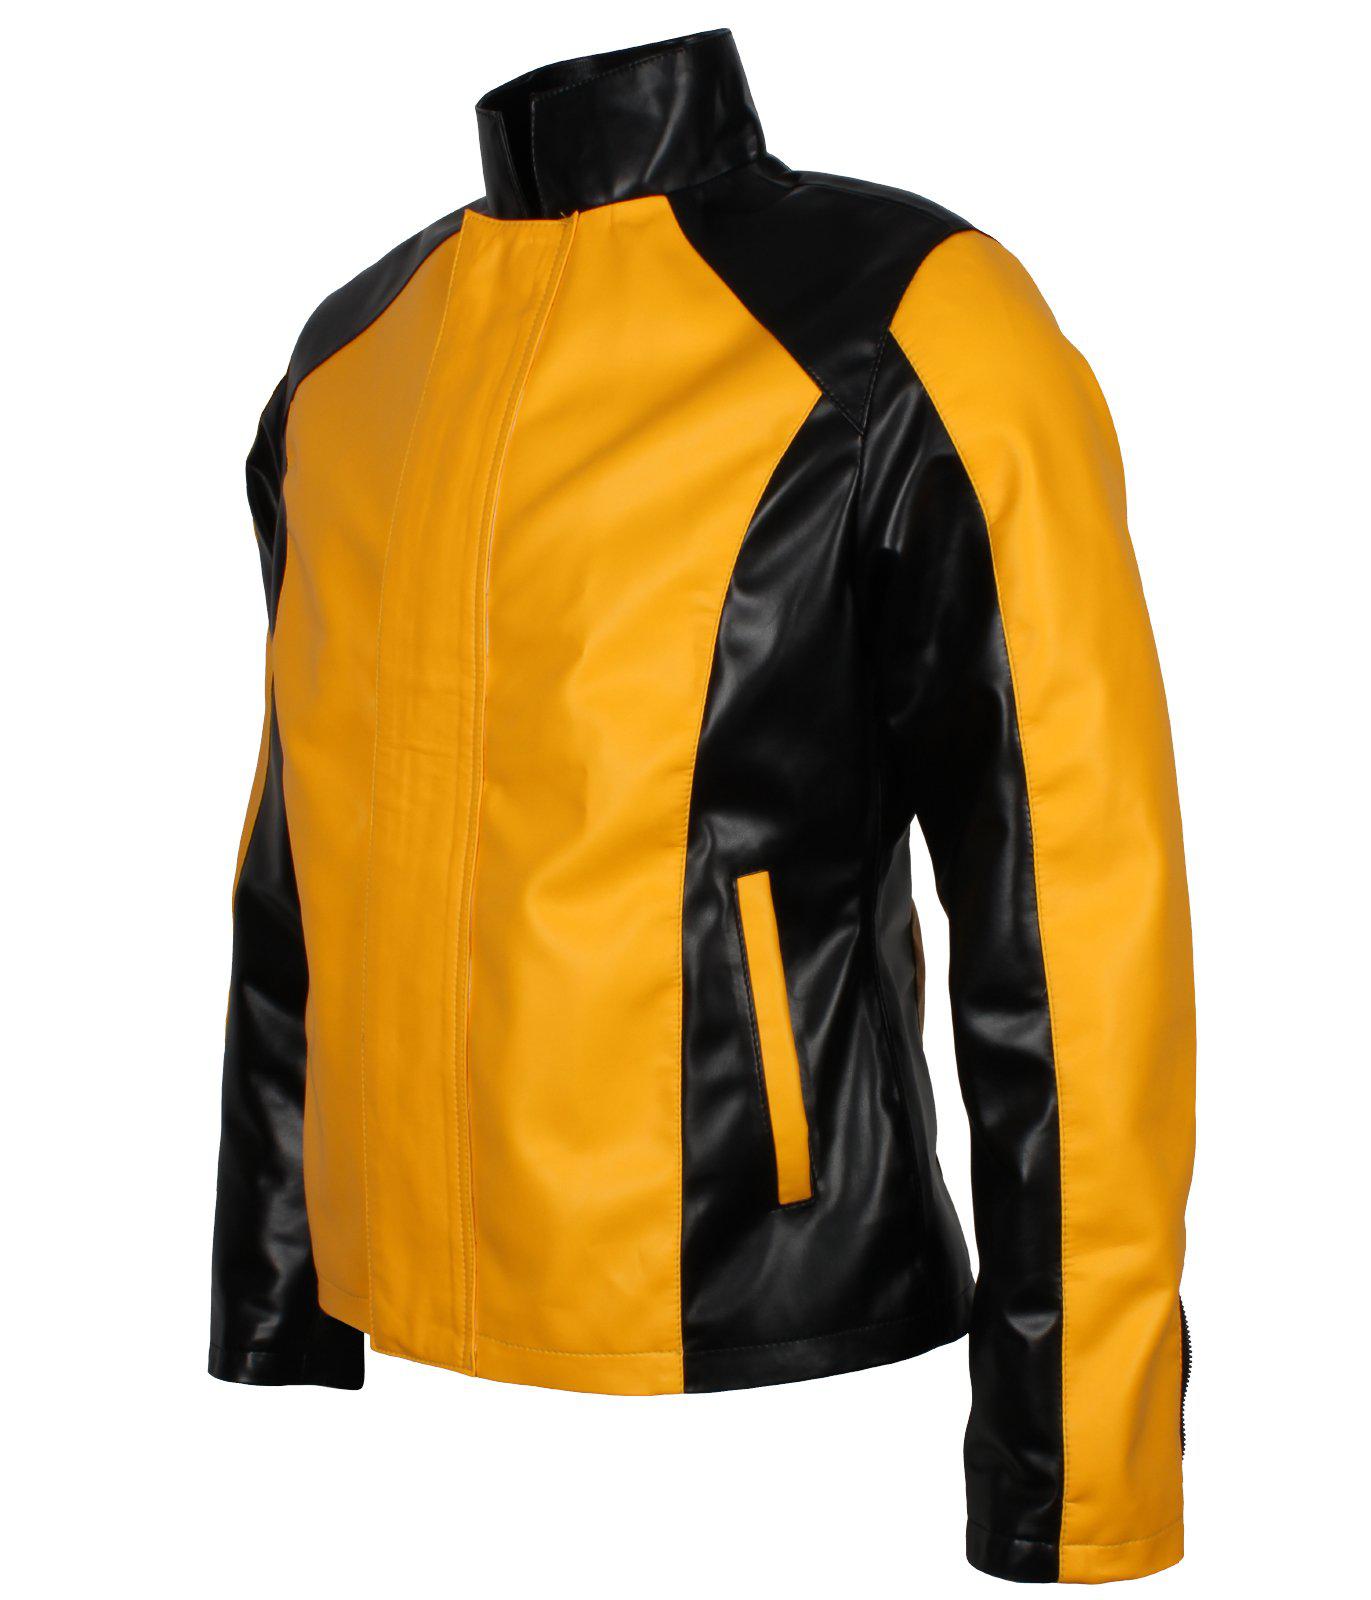 Infamous 2 Cole Macgrath Black and Yellow Leather Jacket – AlexGear